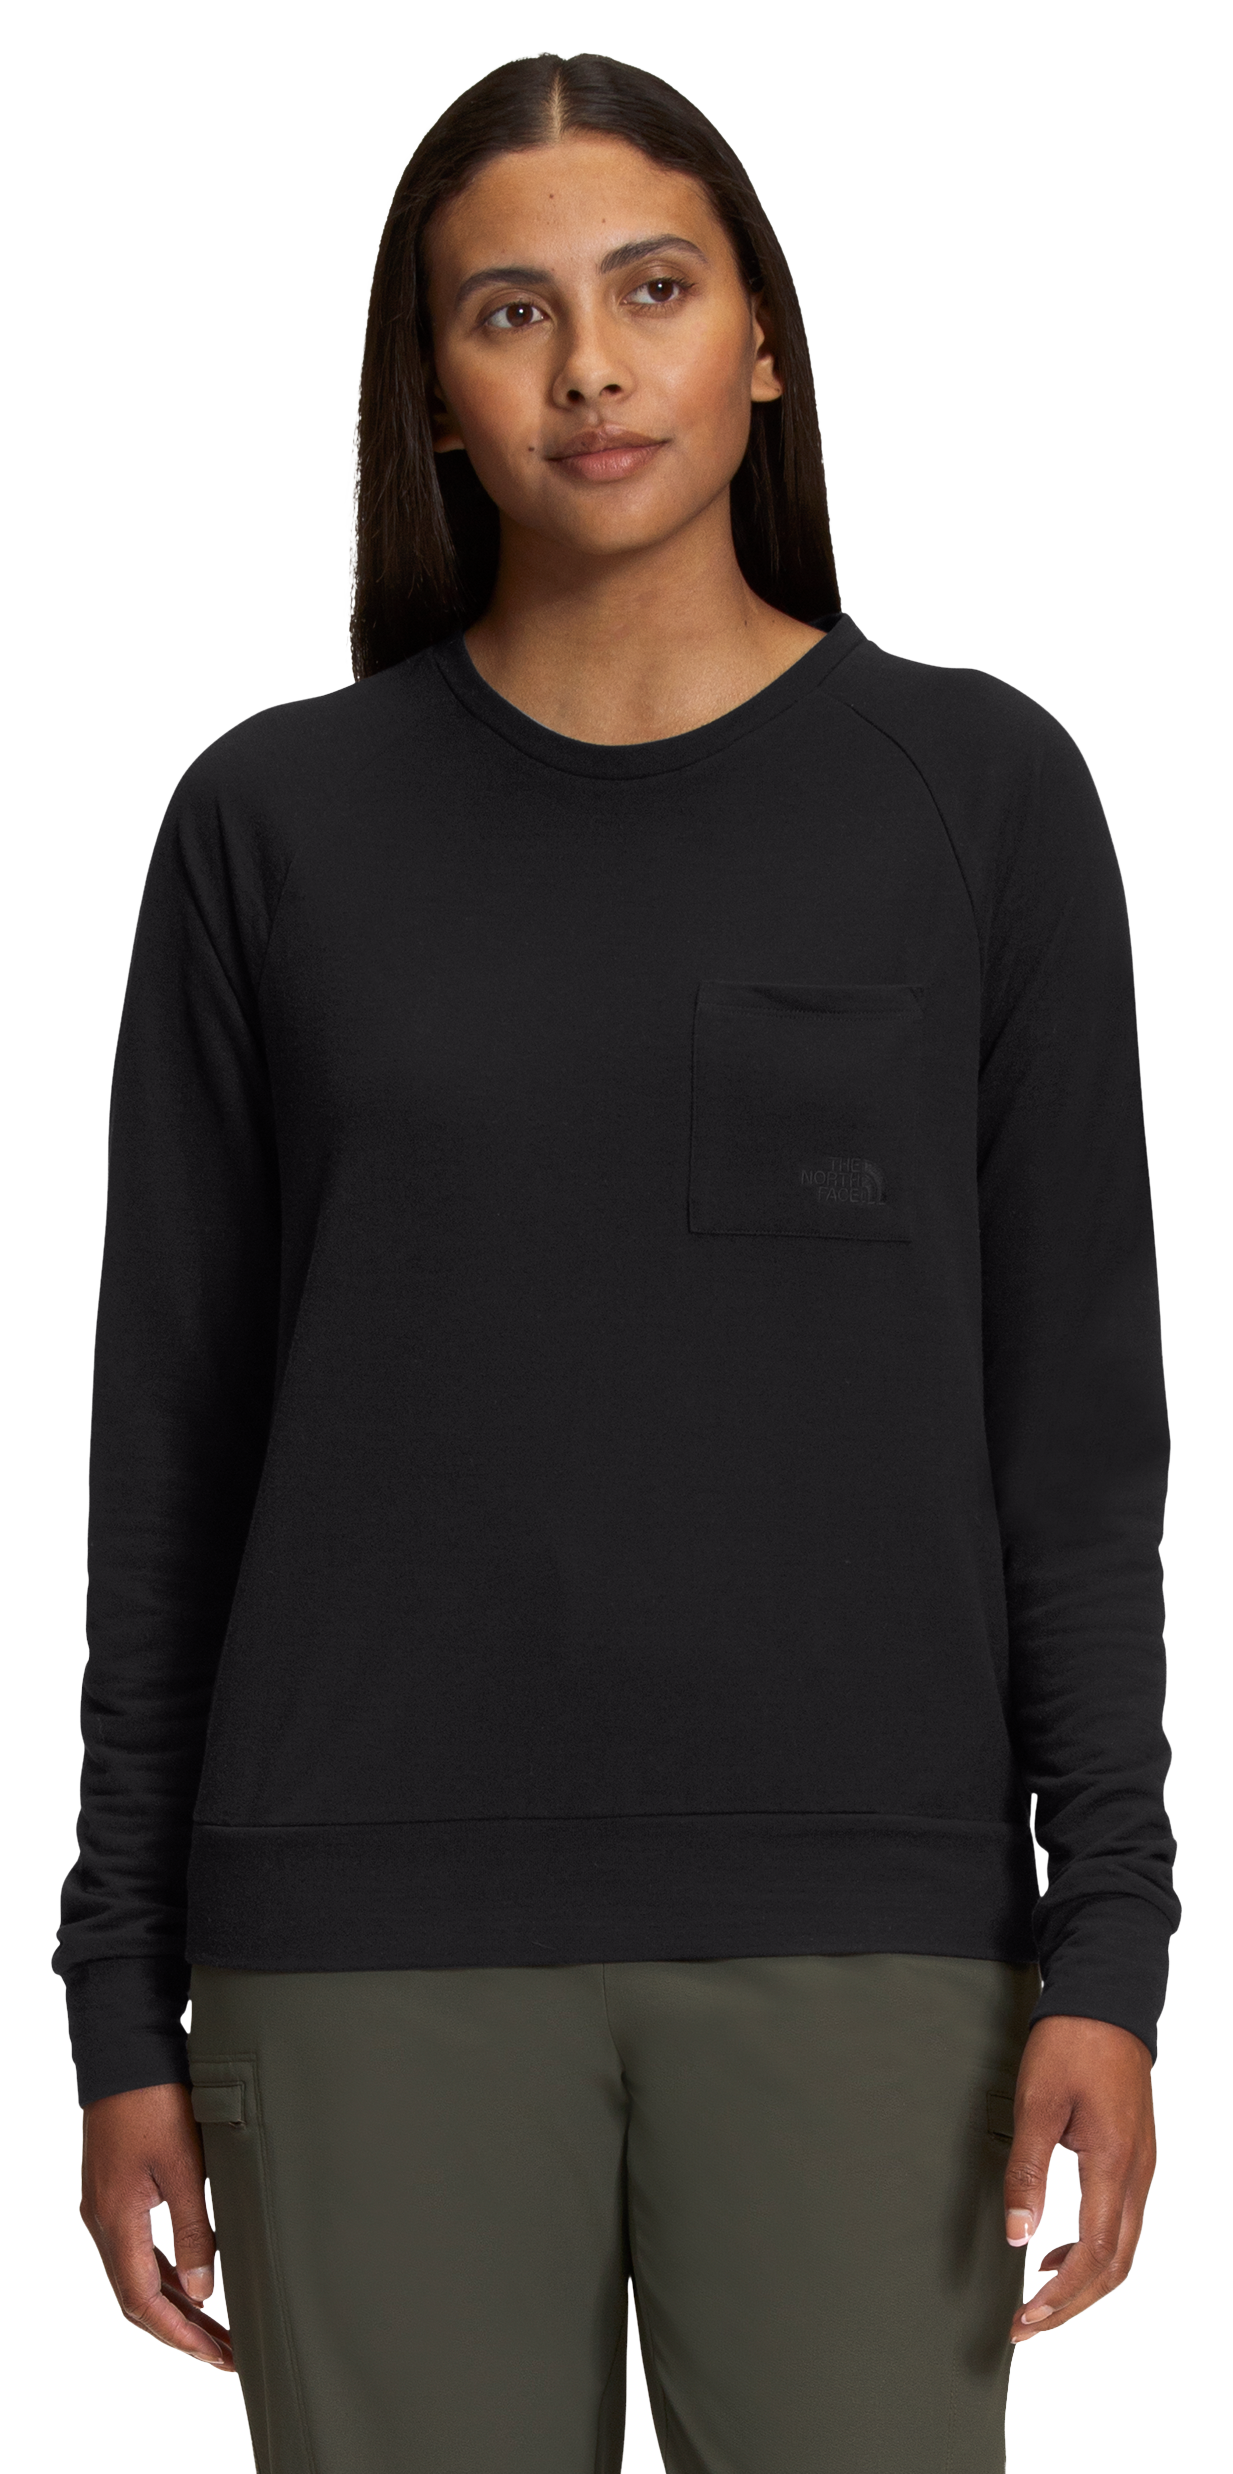 The North Face Westbrae Knit Long-Sleeve Crew for Ladies - TNF Black - XXL